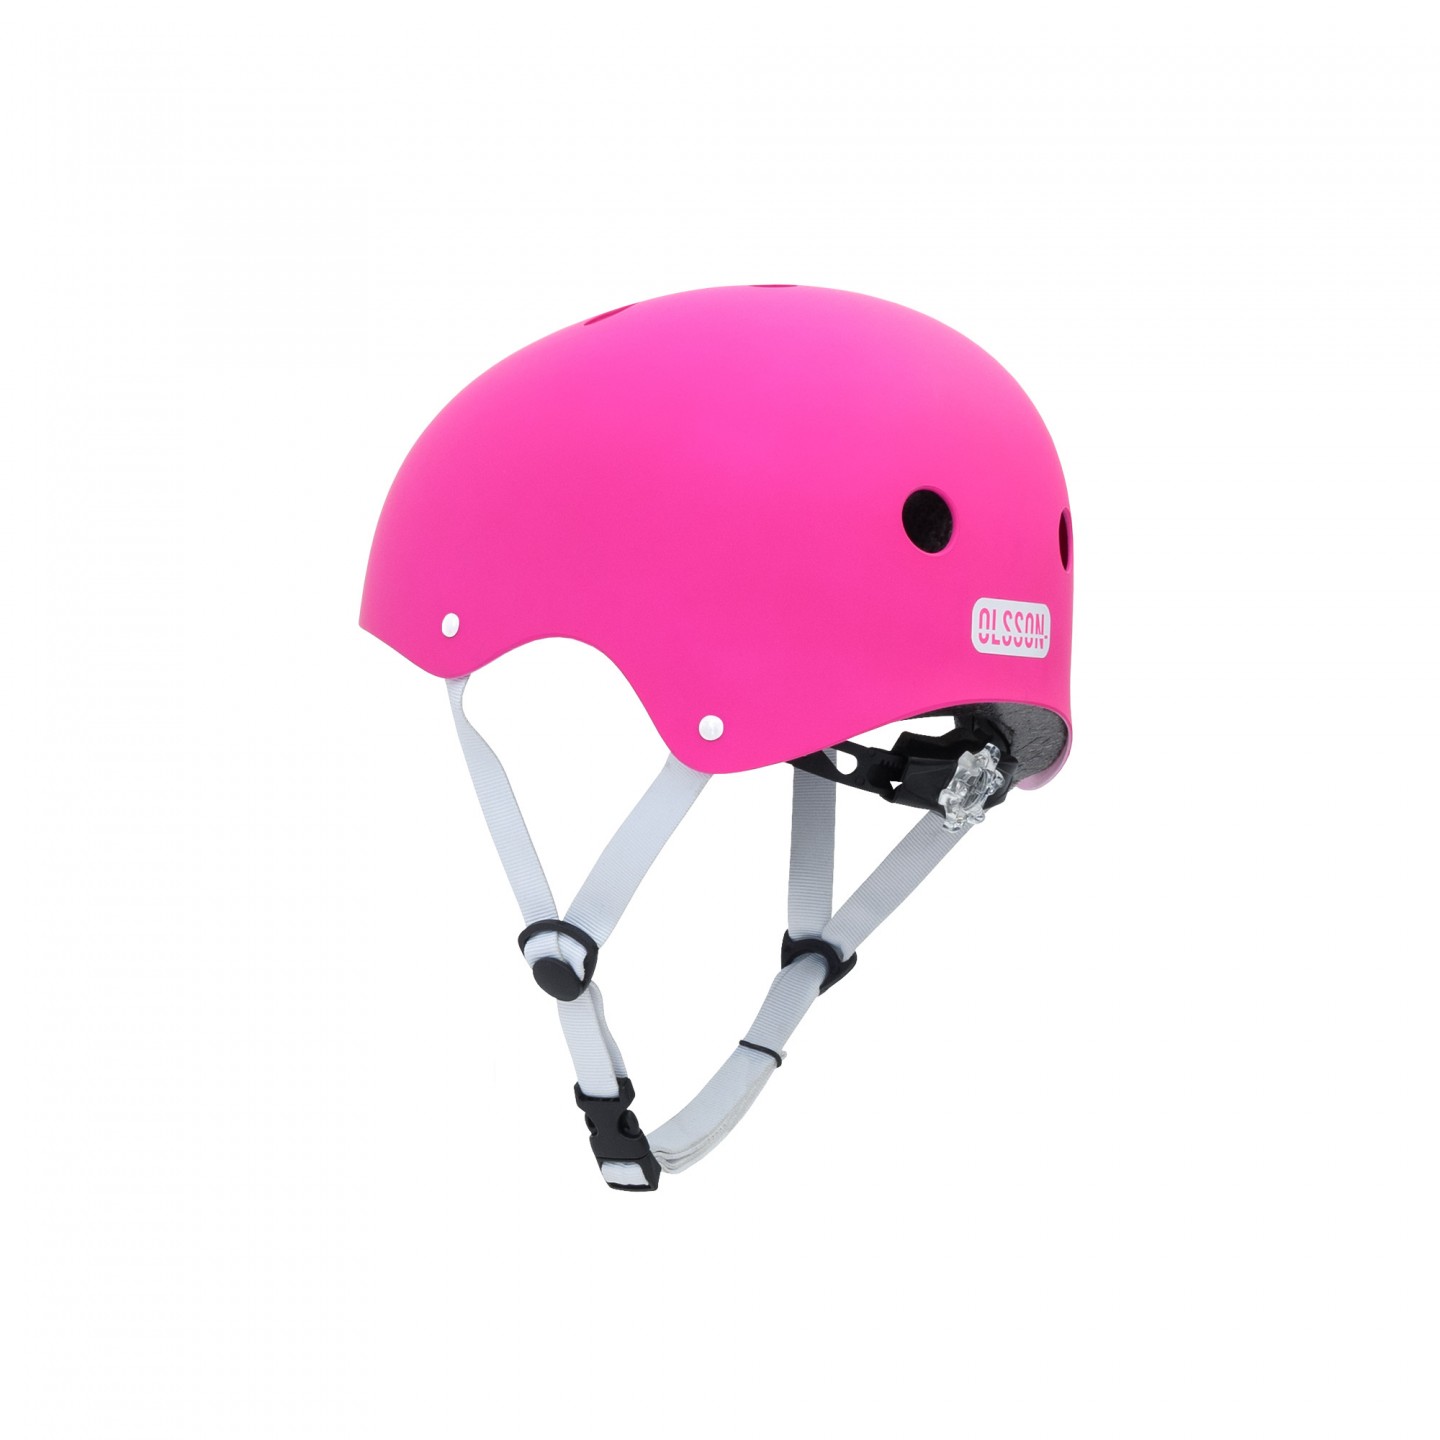 CASCO ANTRACYTE. Talla M/L - Olsson and Brothers